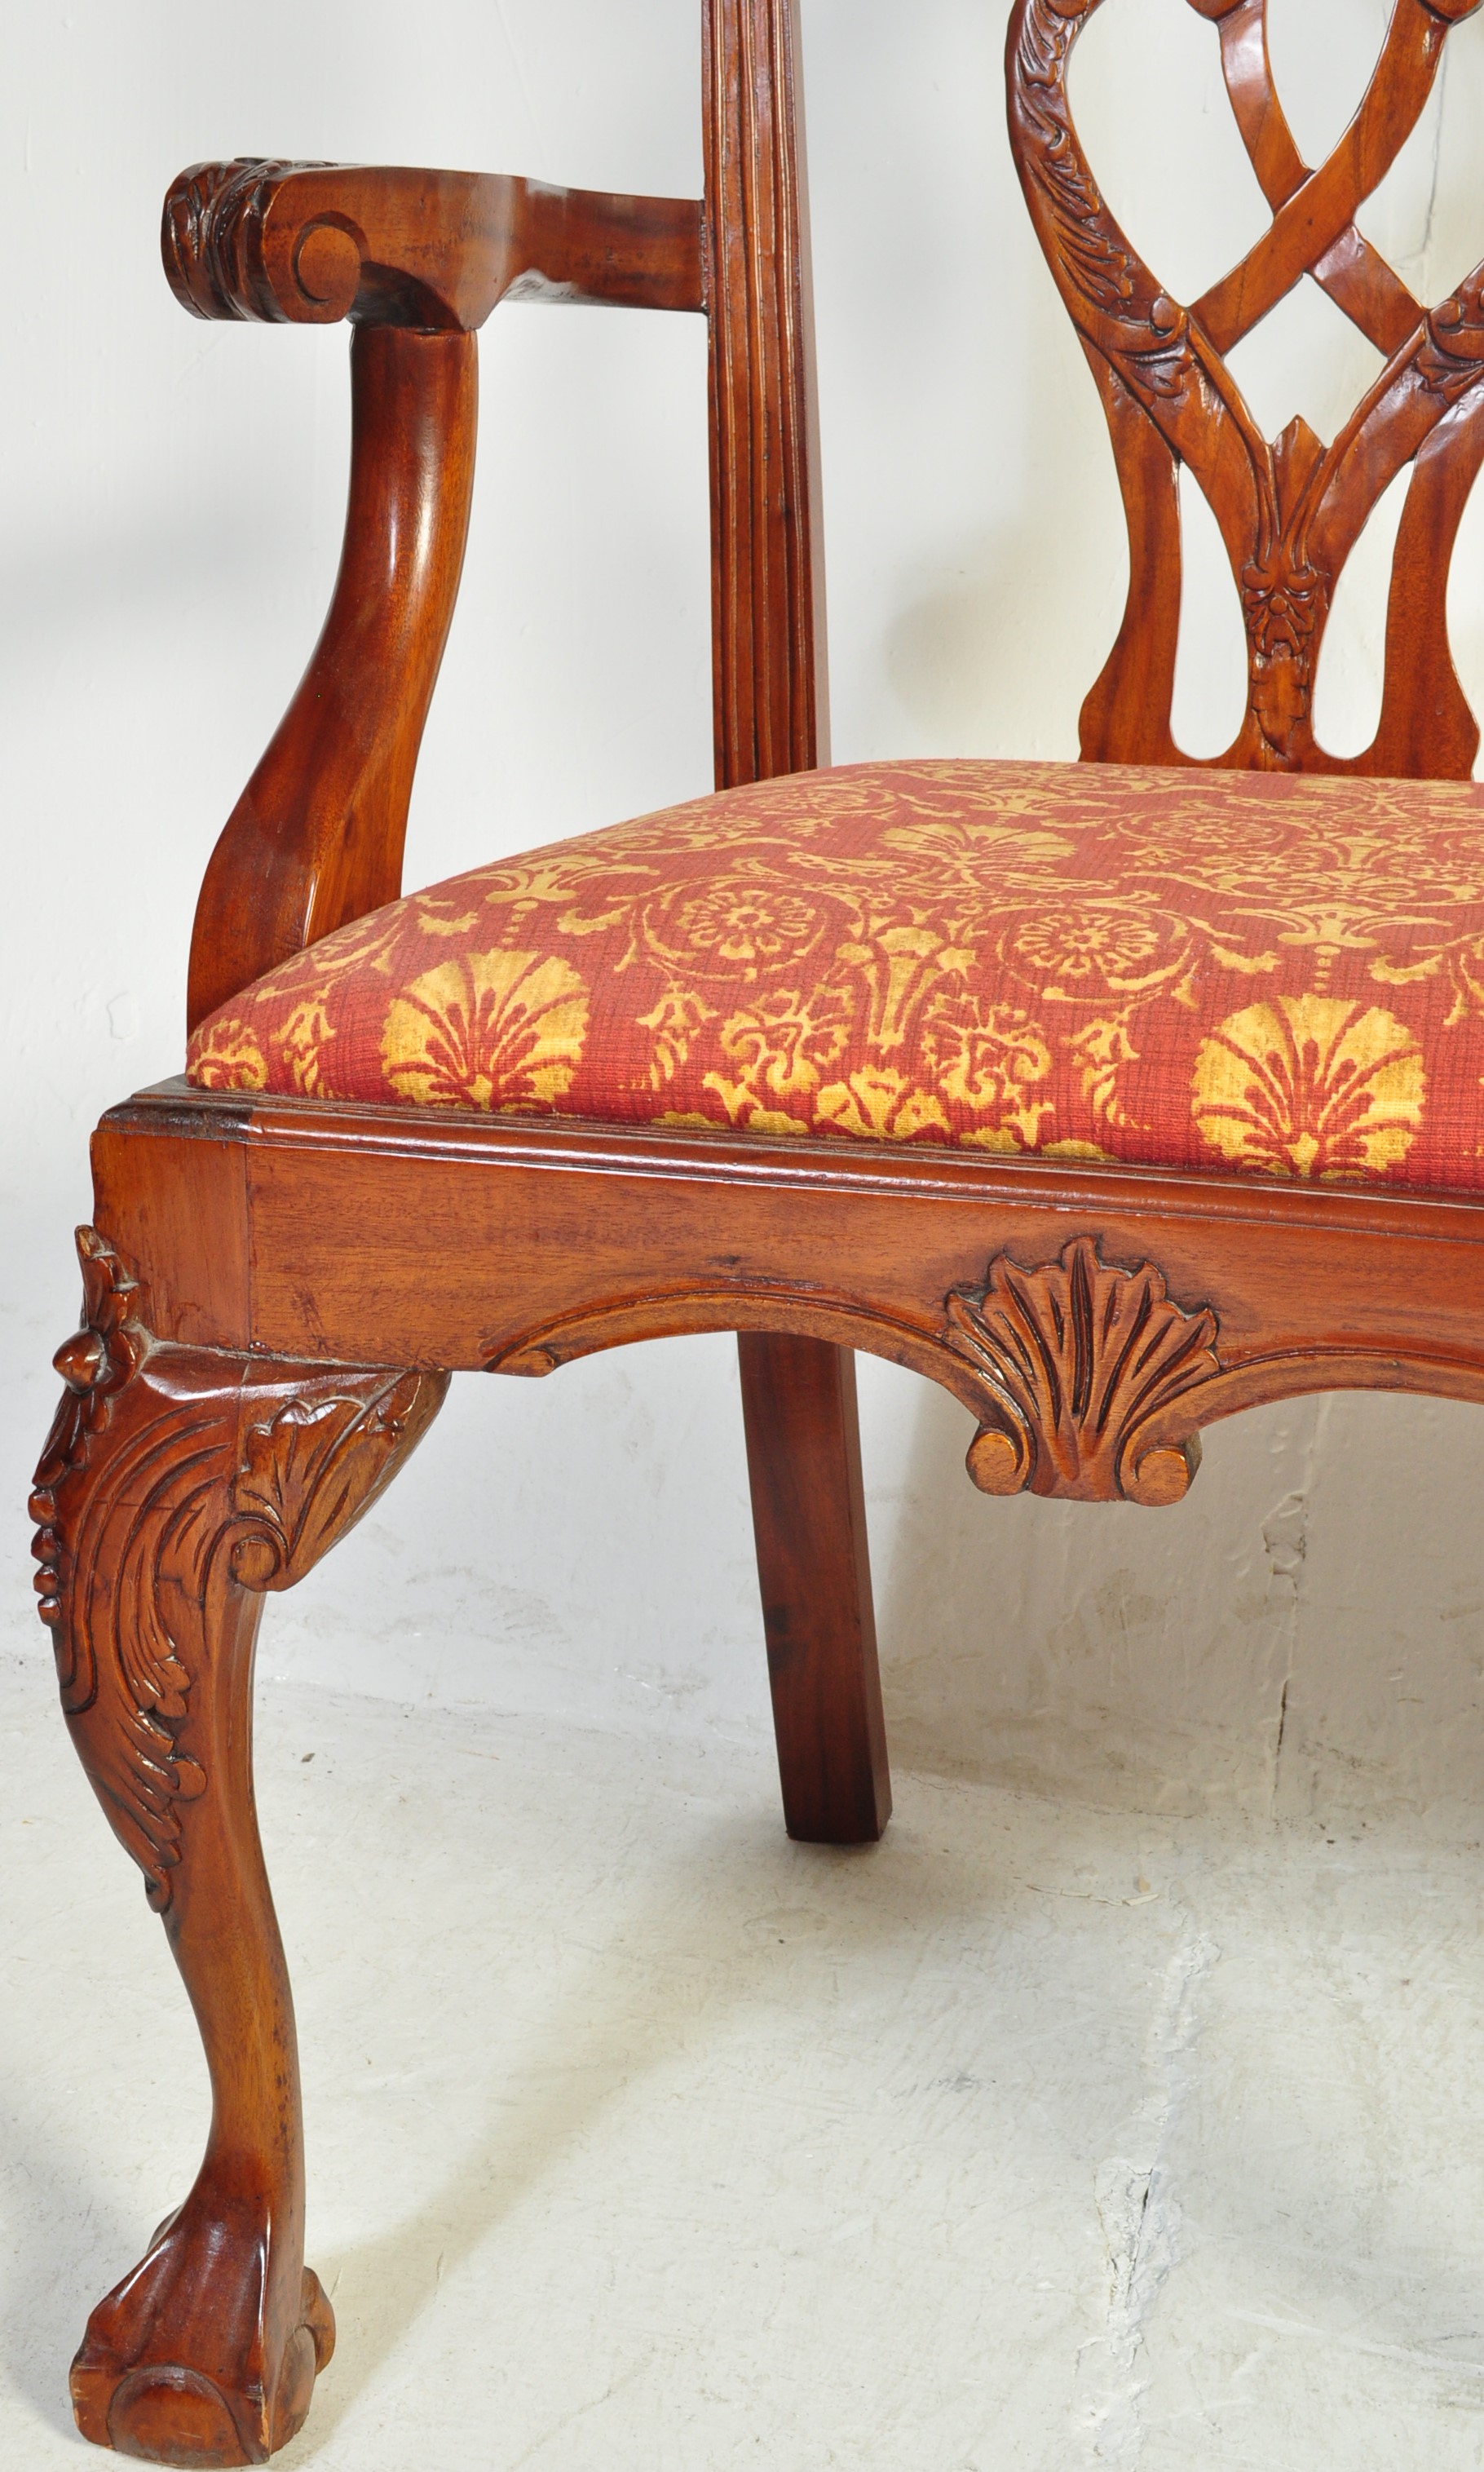 GEORGE IV REPRODUCTION MAHOGANY TWO SEATER SOFA - Image 6 of 7